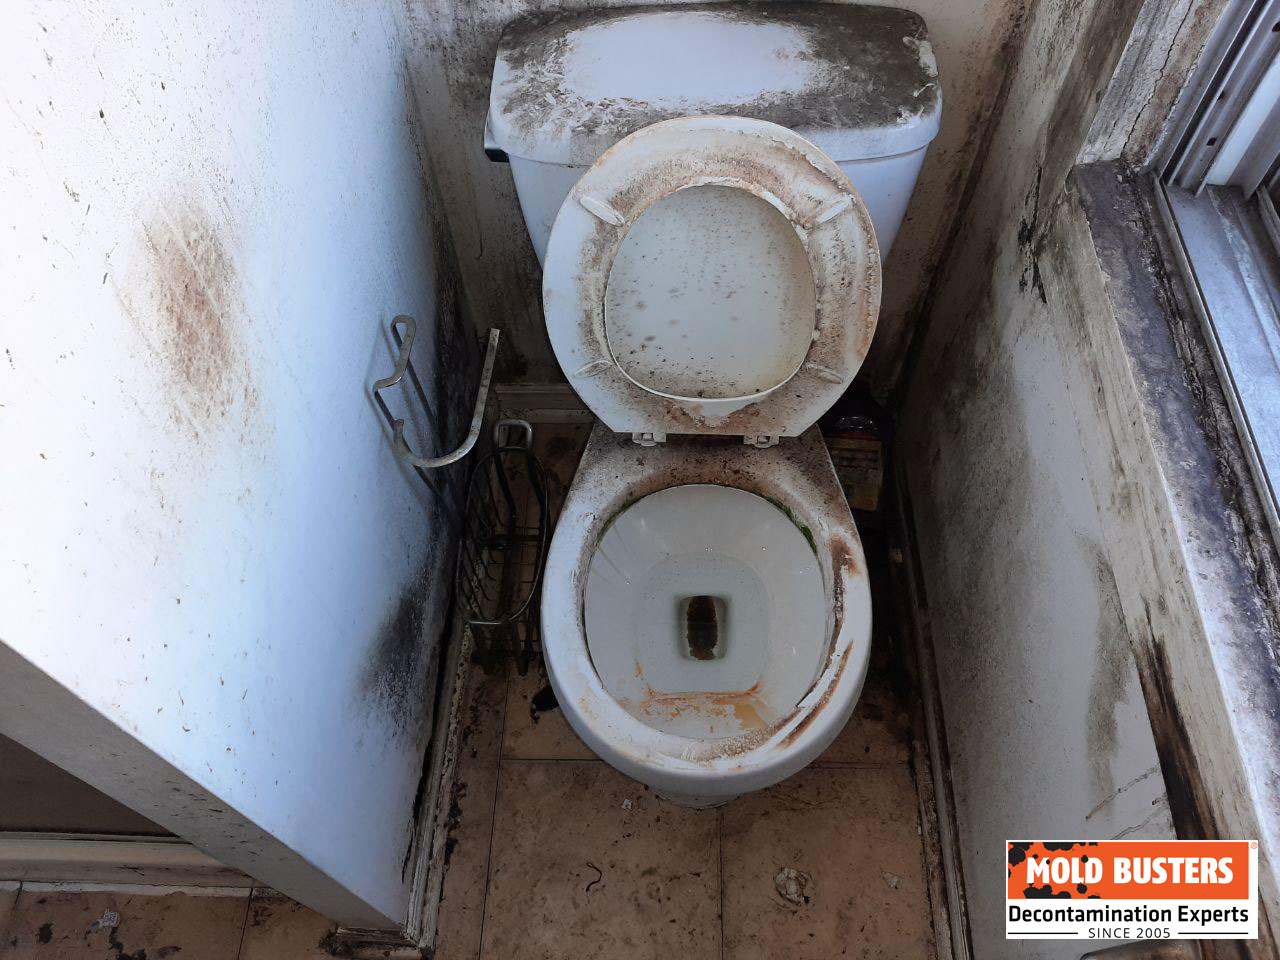 Mold in Toilet: How to Remove Mold in Toilet